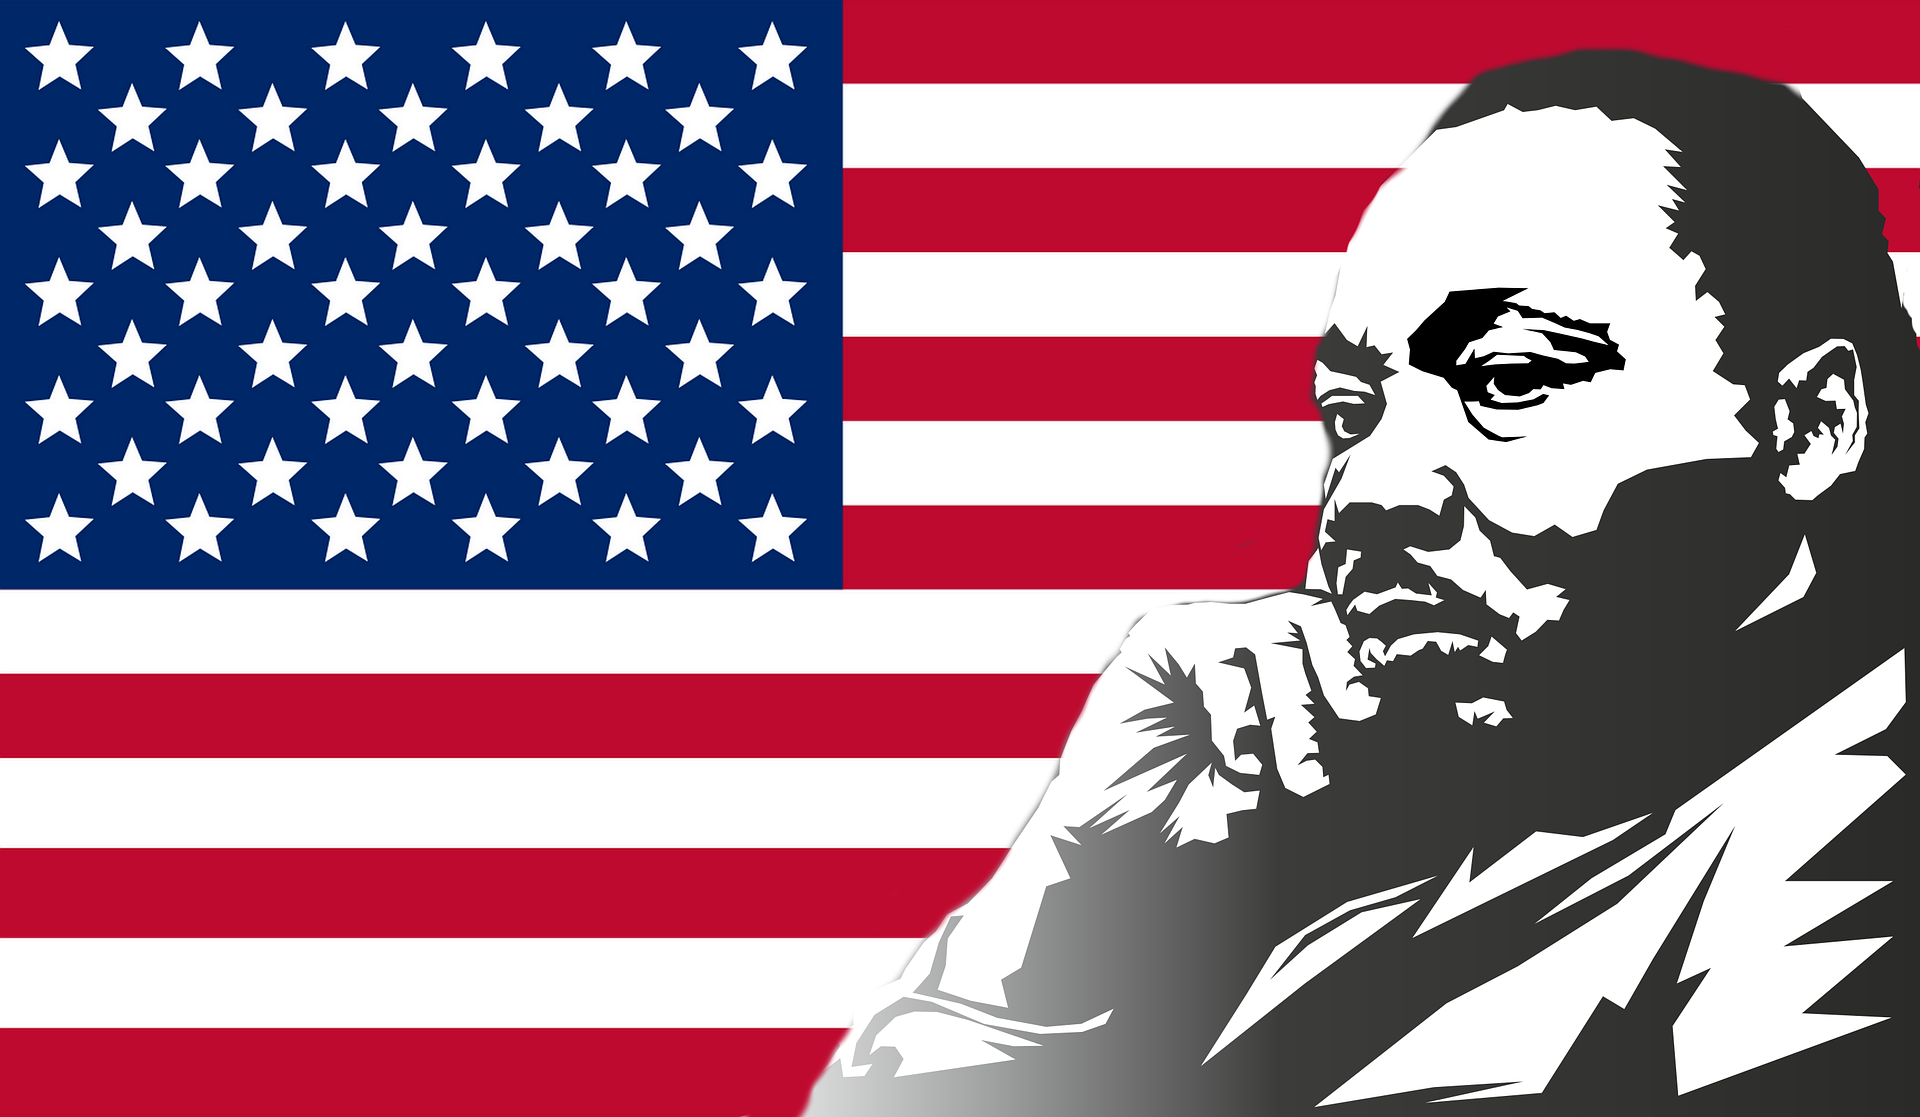 martin luther king essay contest